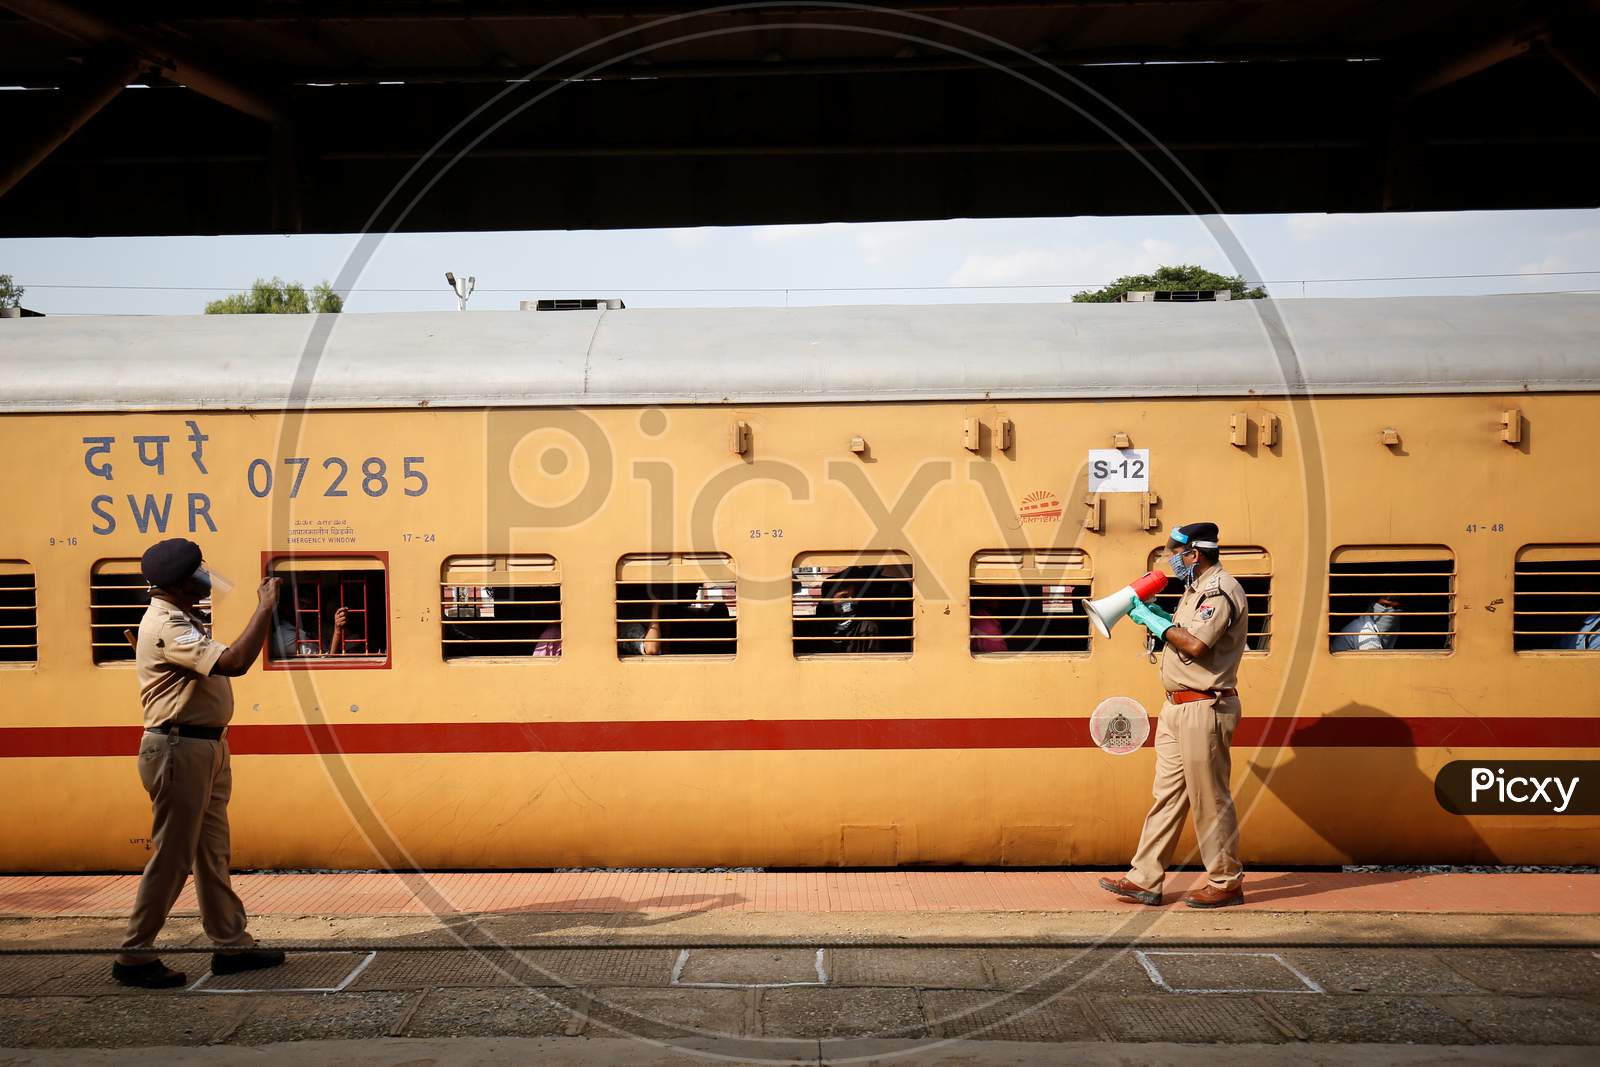 A Railway Protection Force (RPF) personnel uses a megaphone to make a public safety announcement to people travelling to Danapur, Bihar in a special train arranged by the government to repatriate migrant workers at the Chikkabanavara Junction Railway Station on the outskirts of Bangalore, India.